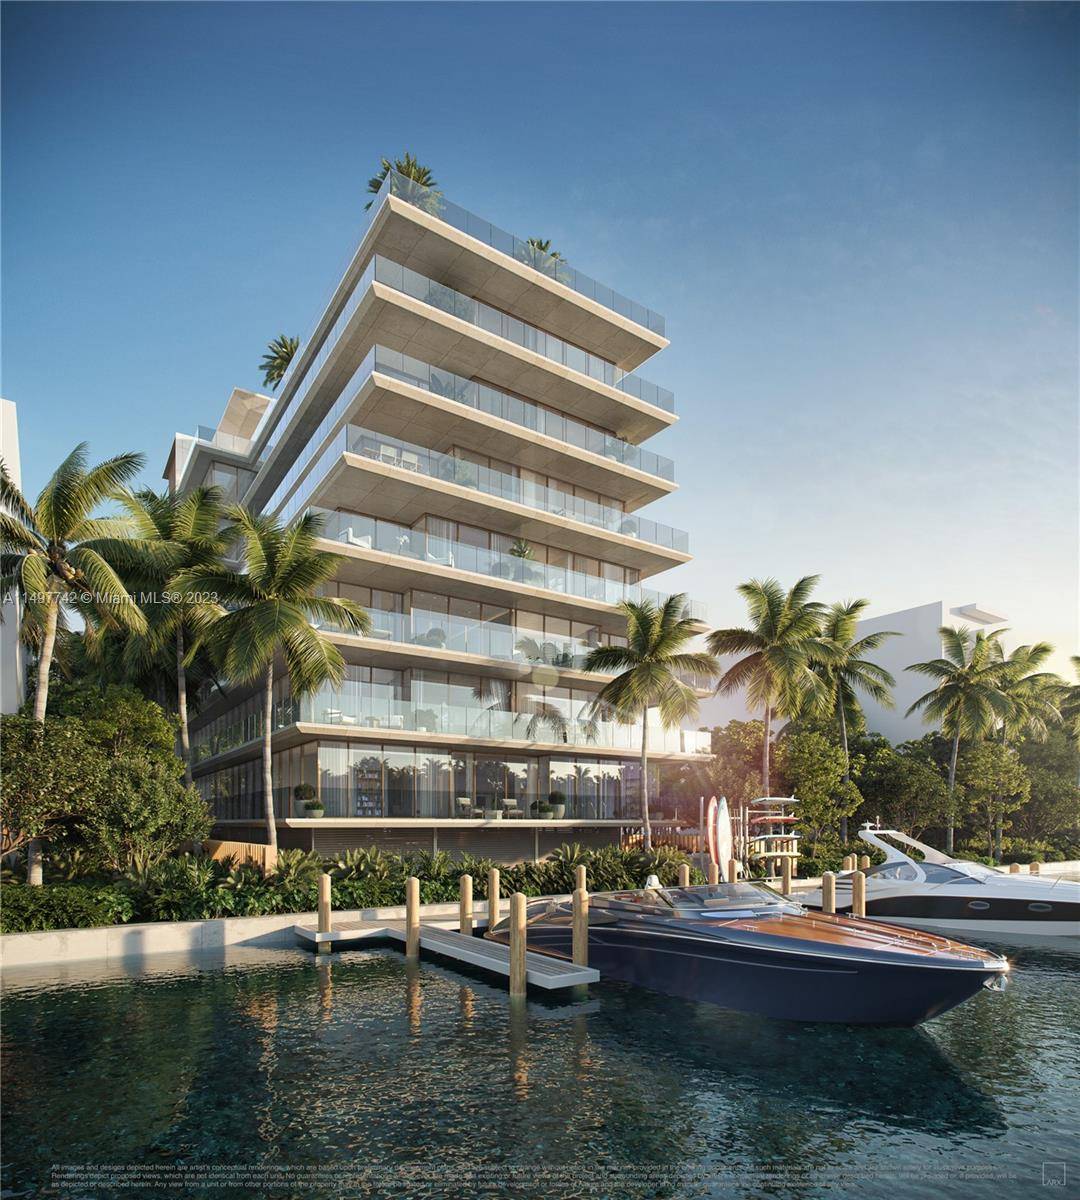 Introducing La Mare Signature Unit 201 Architectural Excellence meets the Perfect Waterfront Views.